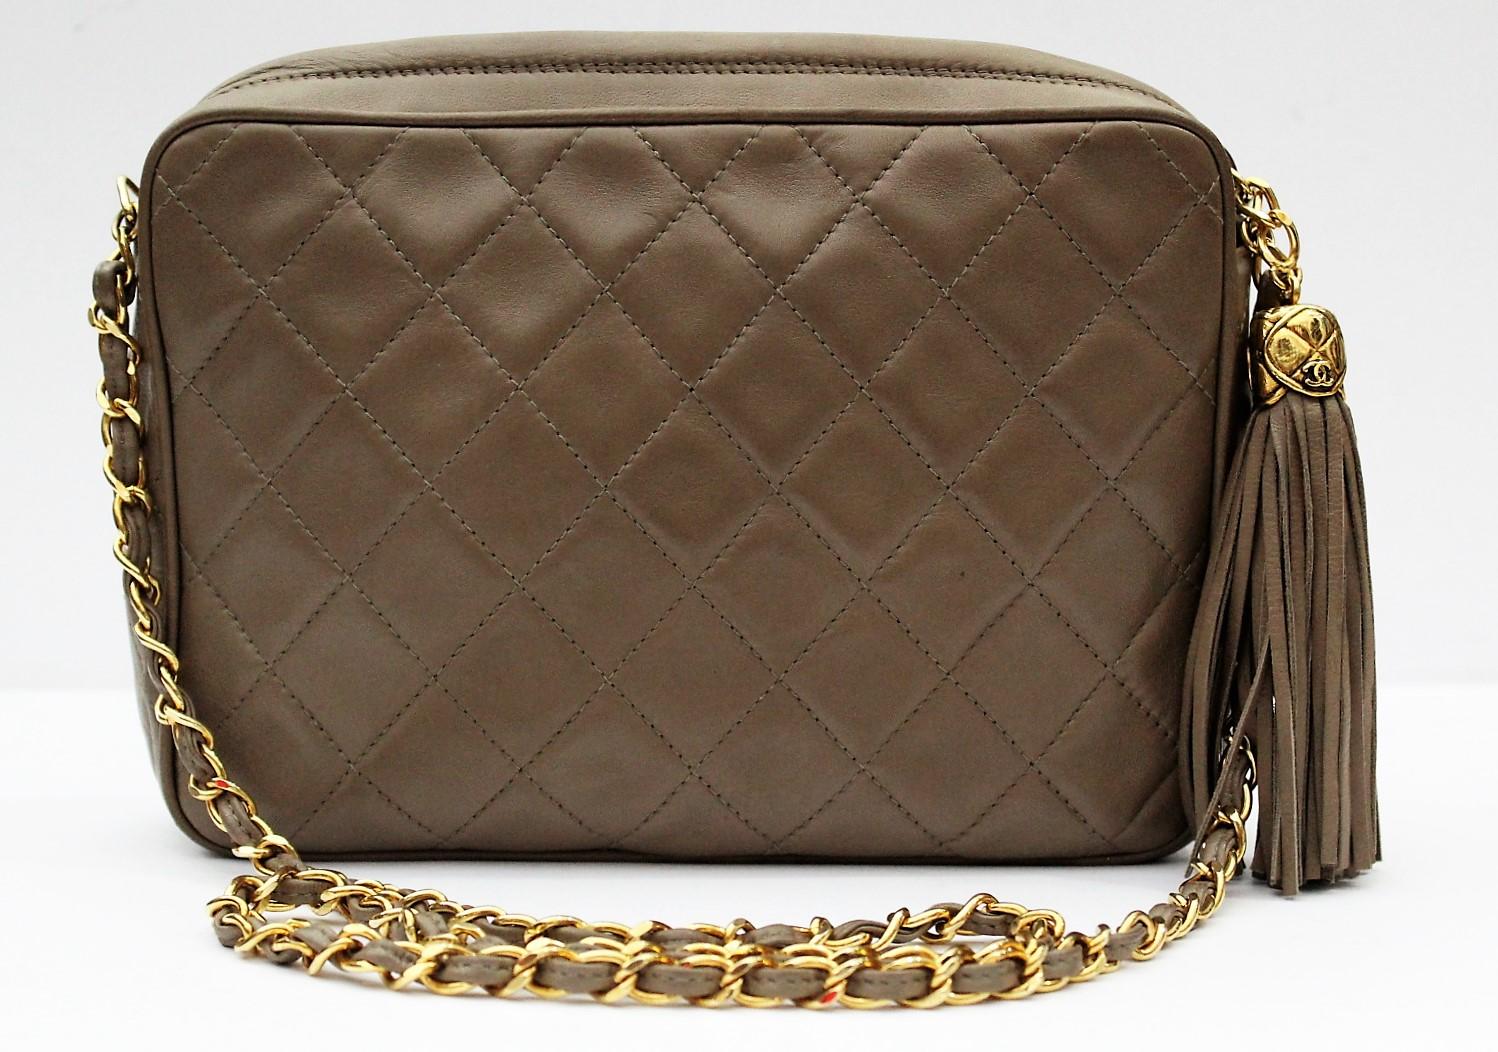 Here is a Chanel bag that gives you a good example how the brand truly stands the test of time.  Check out this Chanel Vintage Quilted Lambskin Camera Bag.  Just simply classic. It never goes out of style. 